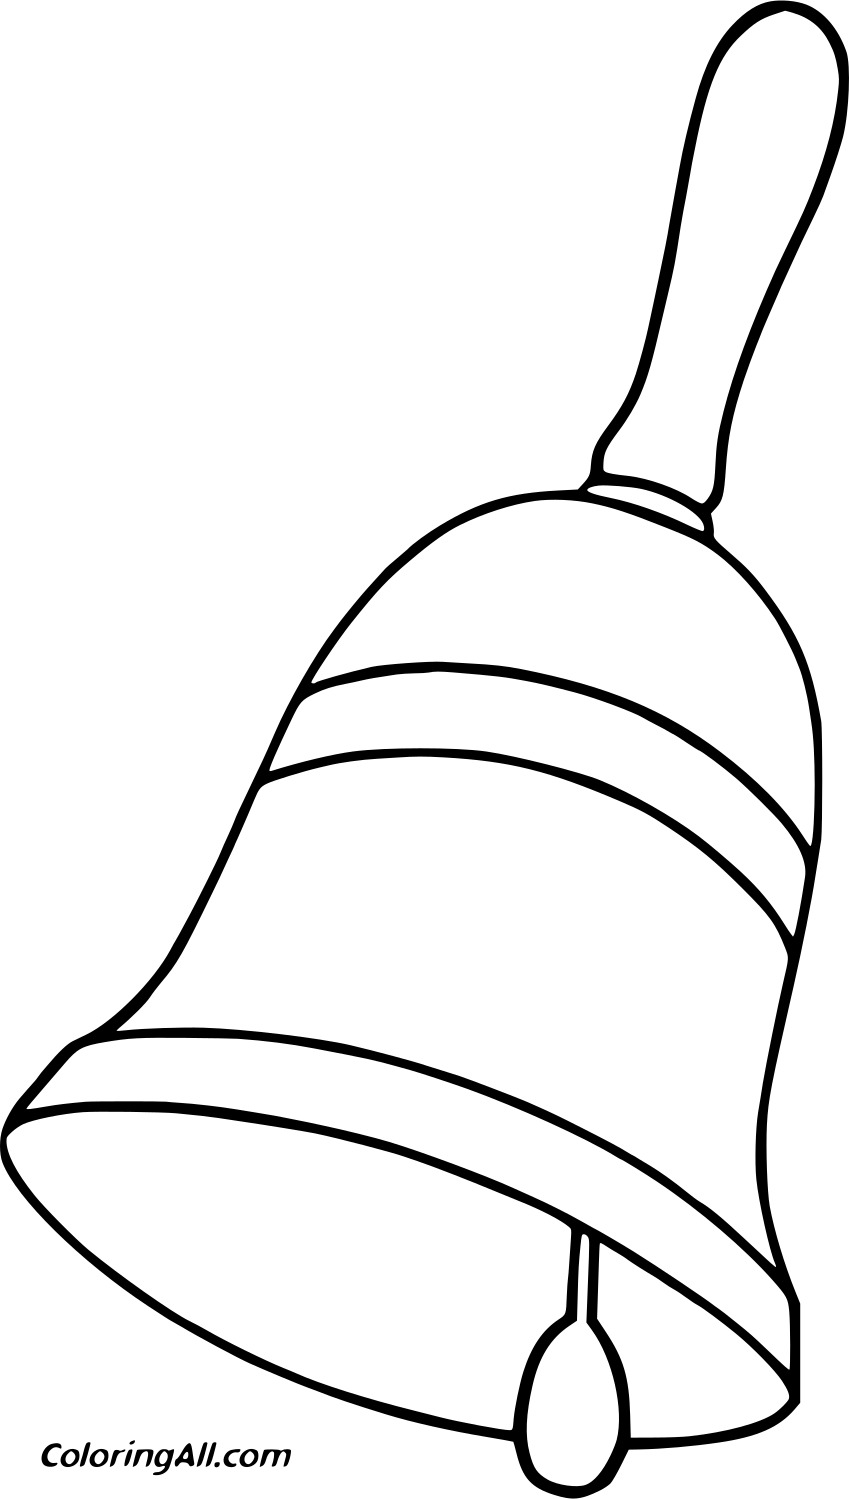 Bell With A Handle Image For Kids Coloring Page